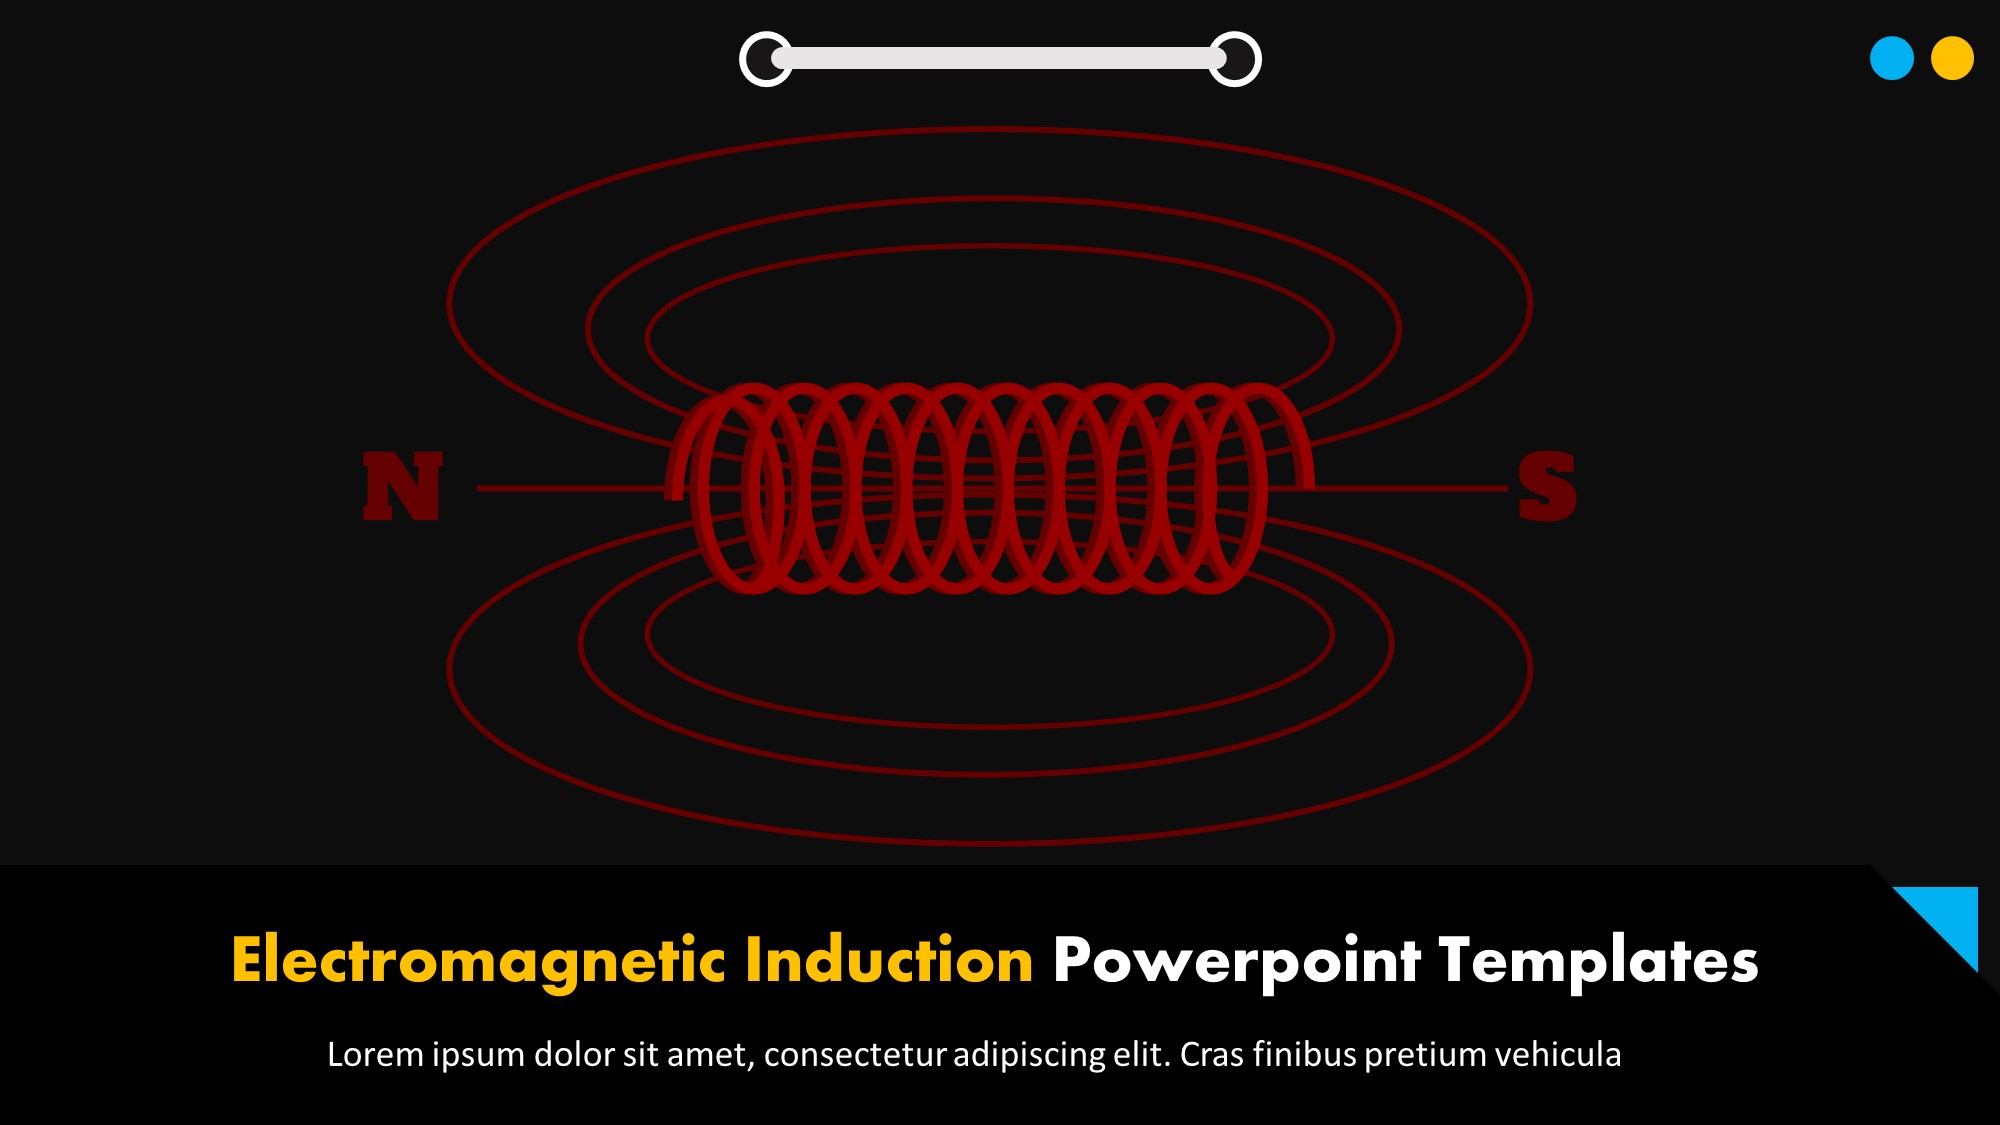 Electromagnetic Induction Powerpoint Templates